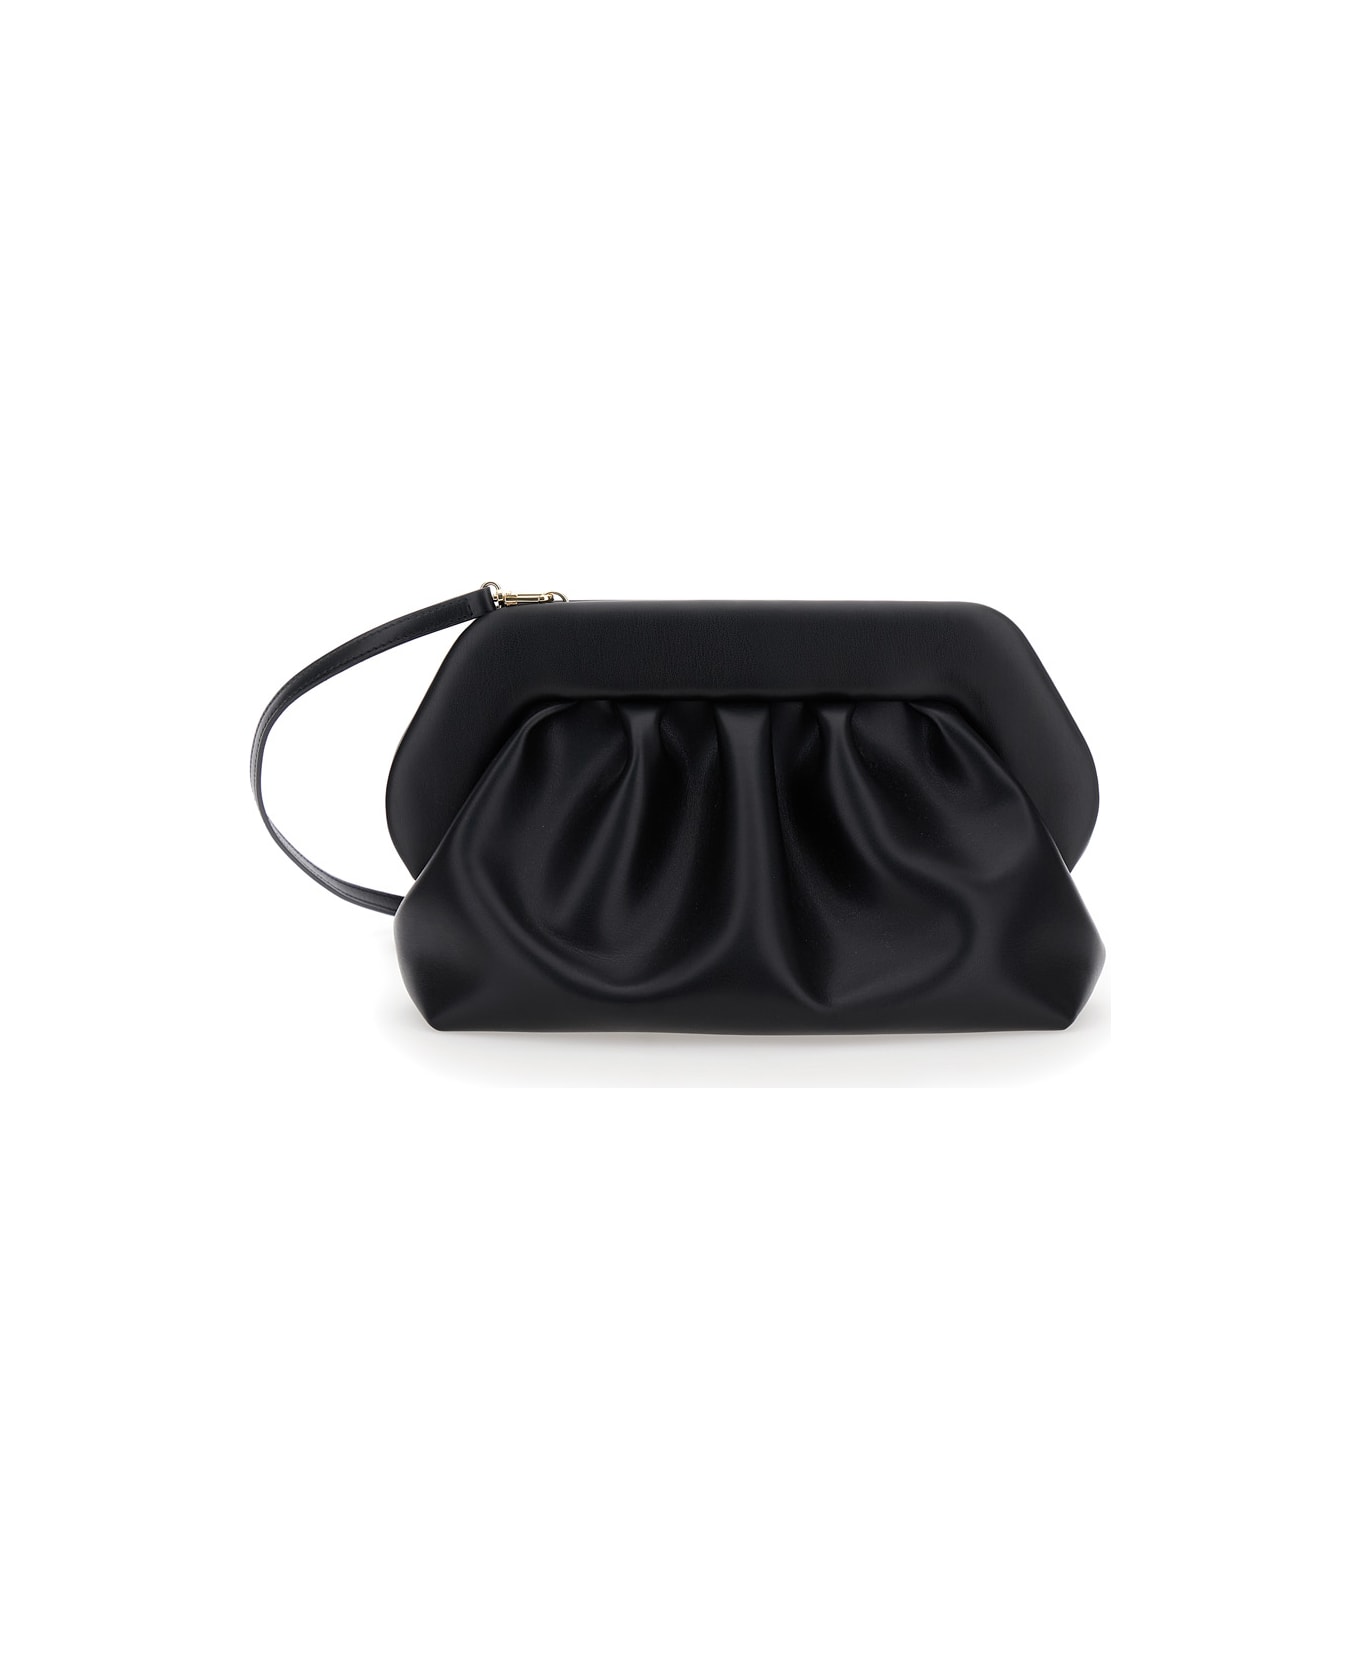 THEMOIRè Black Clutch Bag With Magnetic Closure In Eco Leather Woman - Black